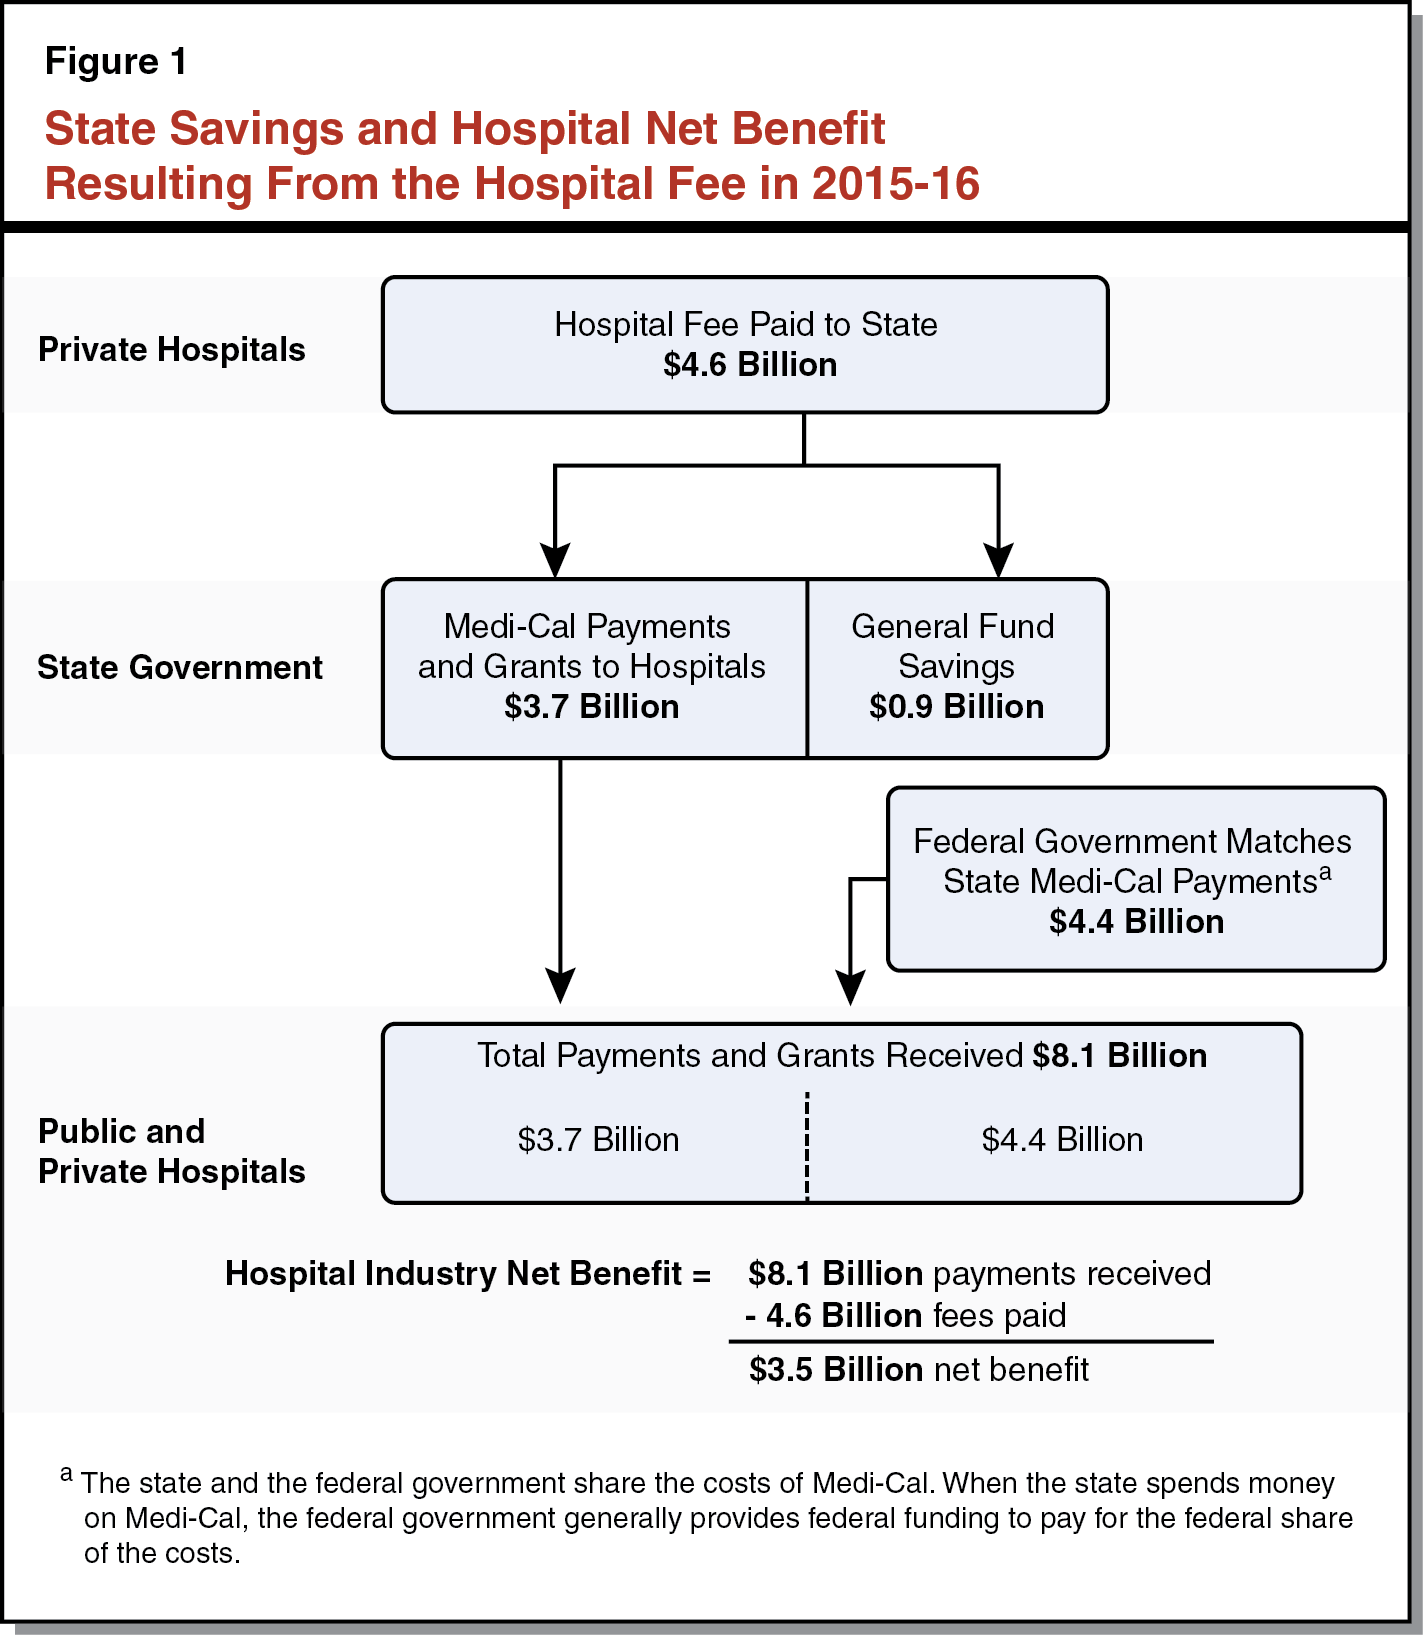 Figure 1 - State Savings and Hospital Net Benefit Resulting From the Hospital Fee in 2015-16